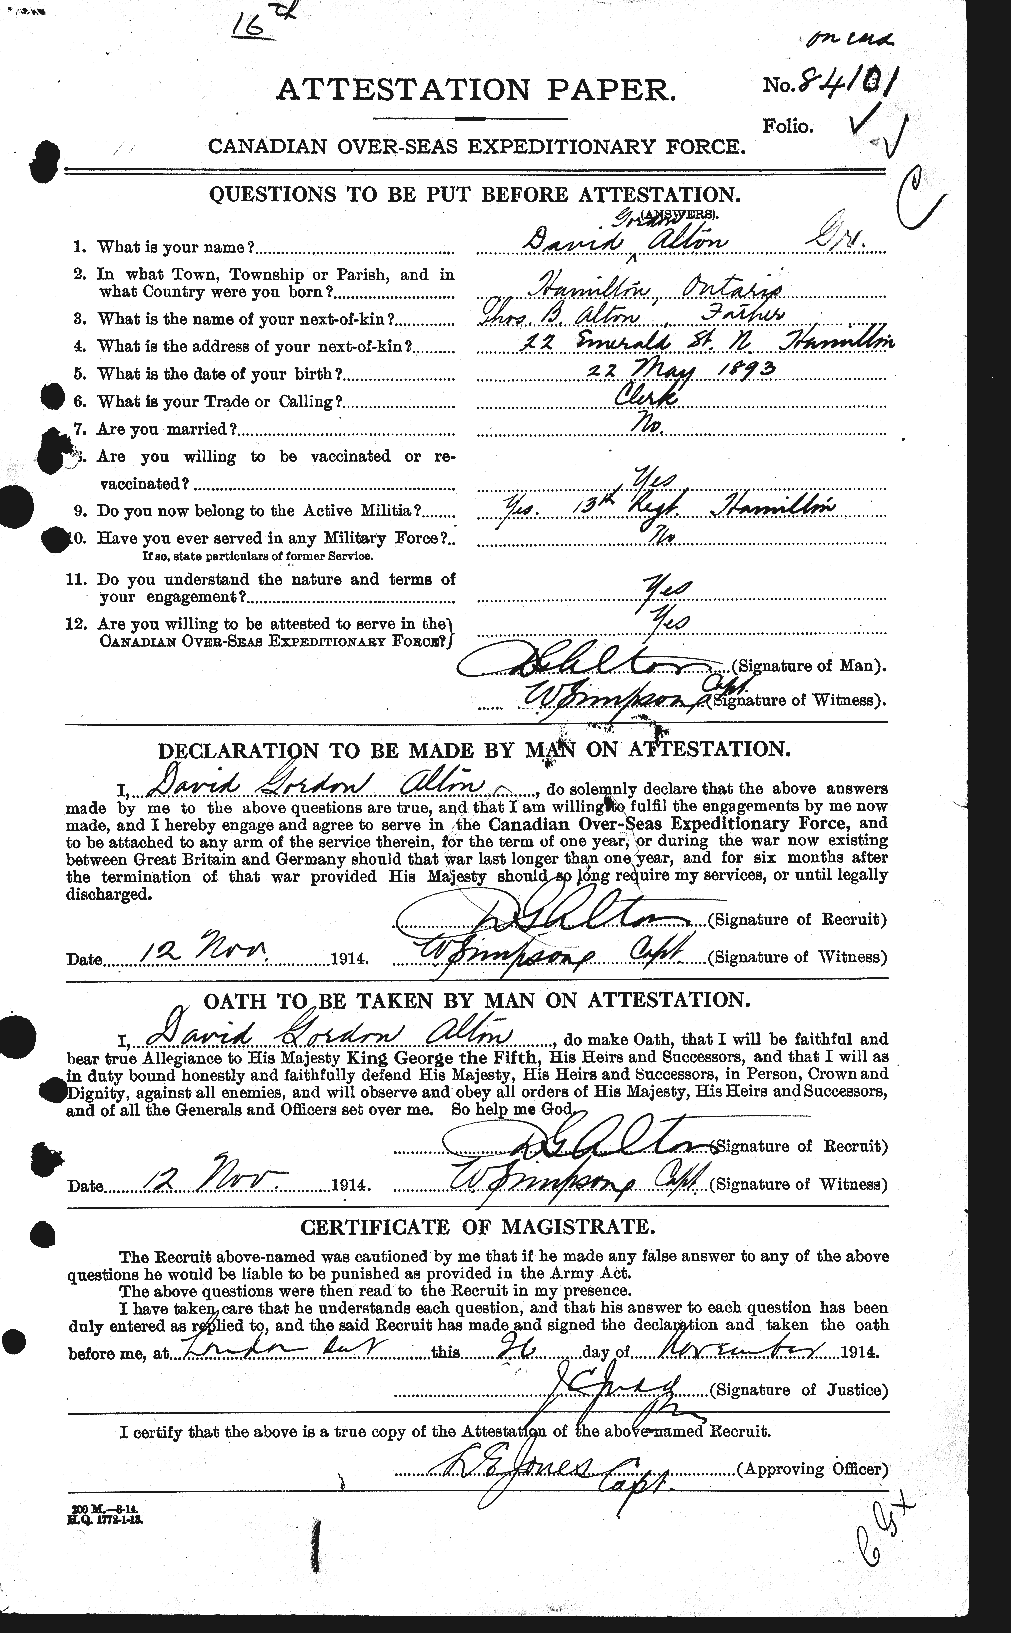 Personnel Records of the First World War - CEF 208124a